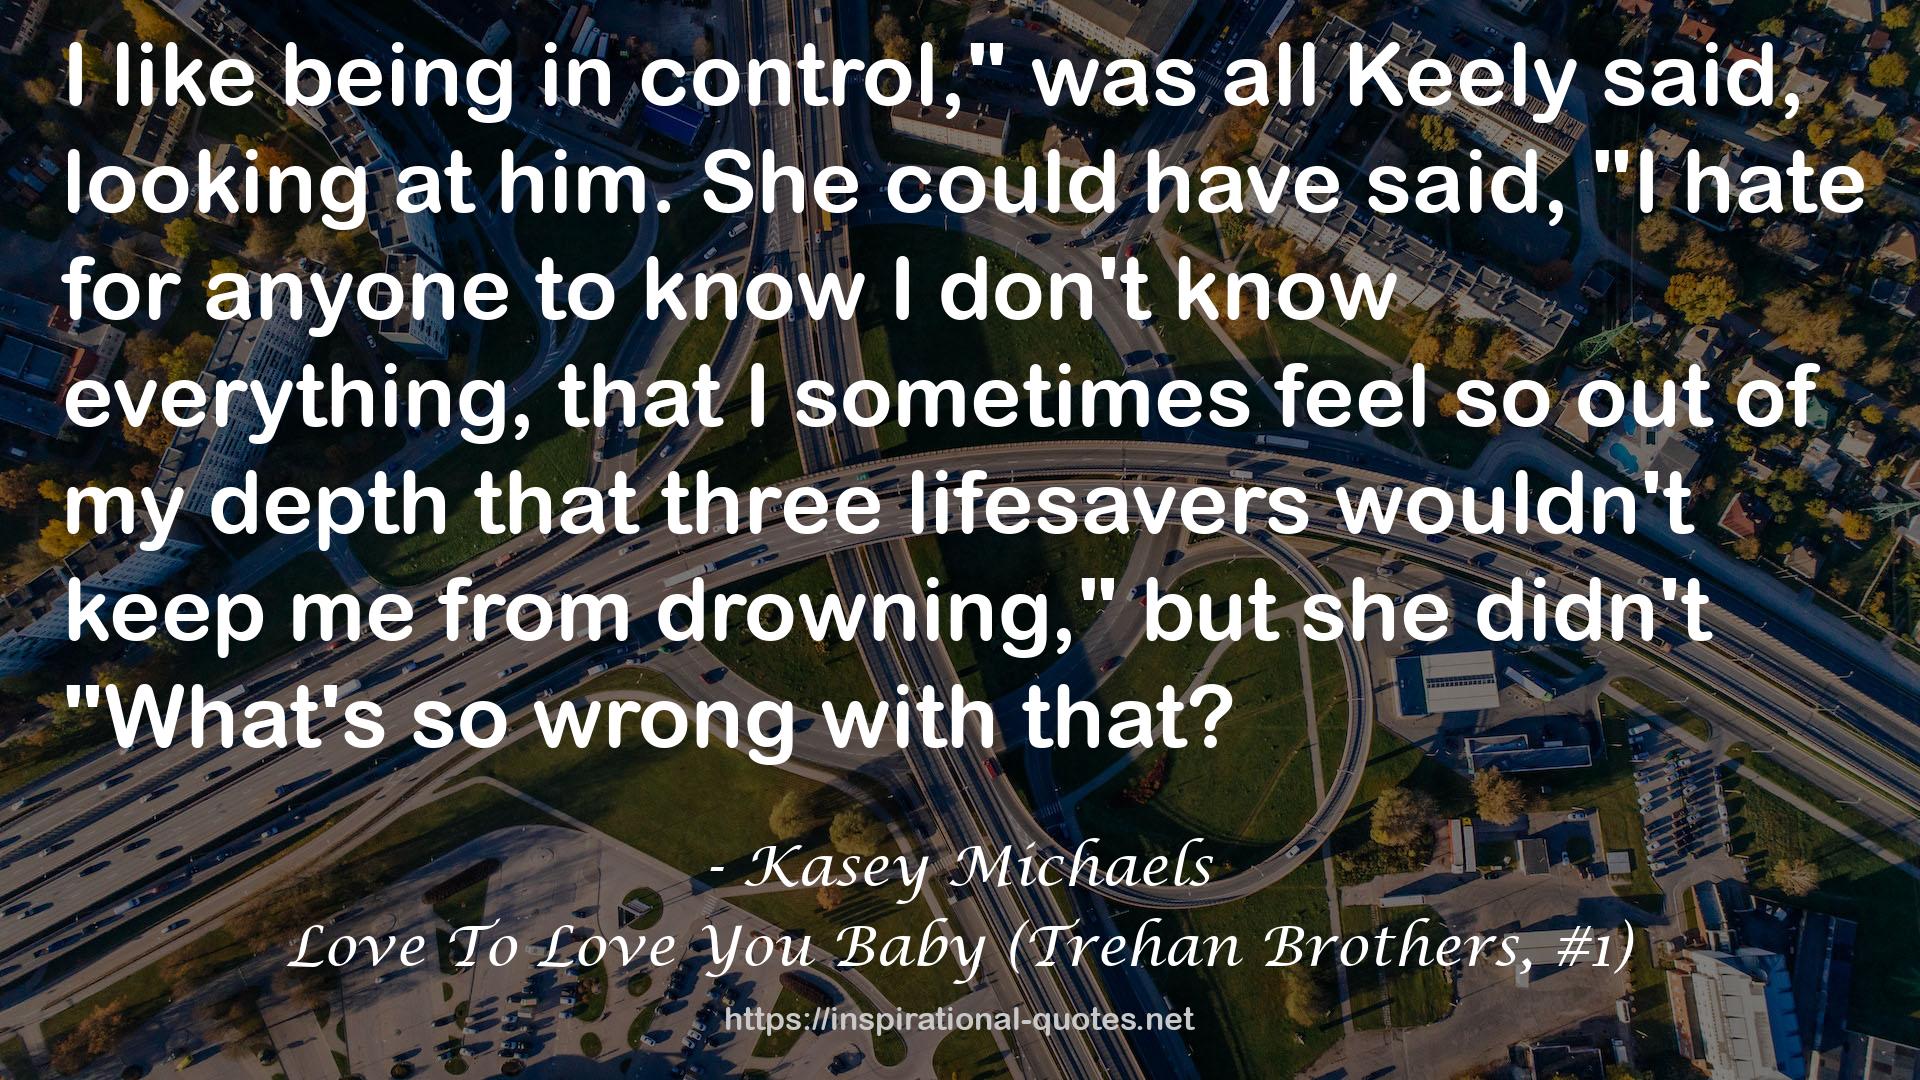 Love To Love You Baby (Trehan Brothers, #1) QUOTES